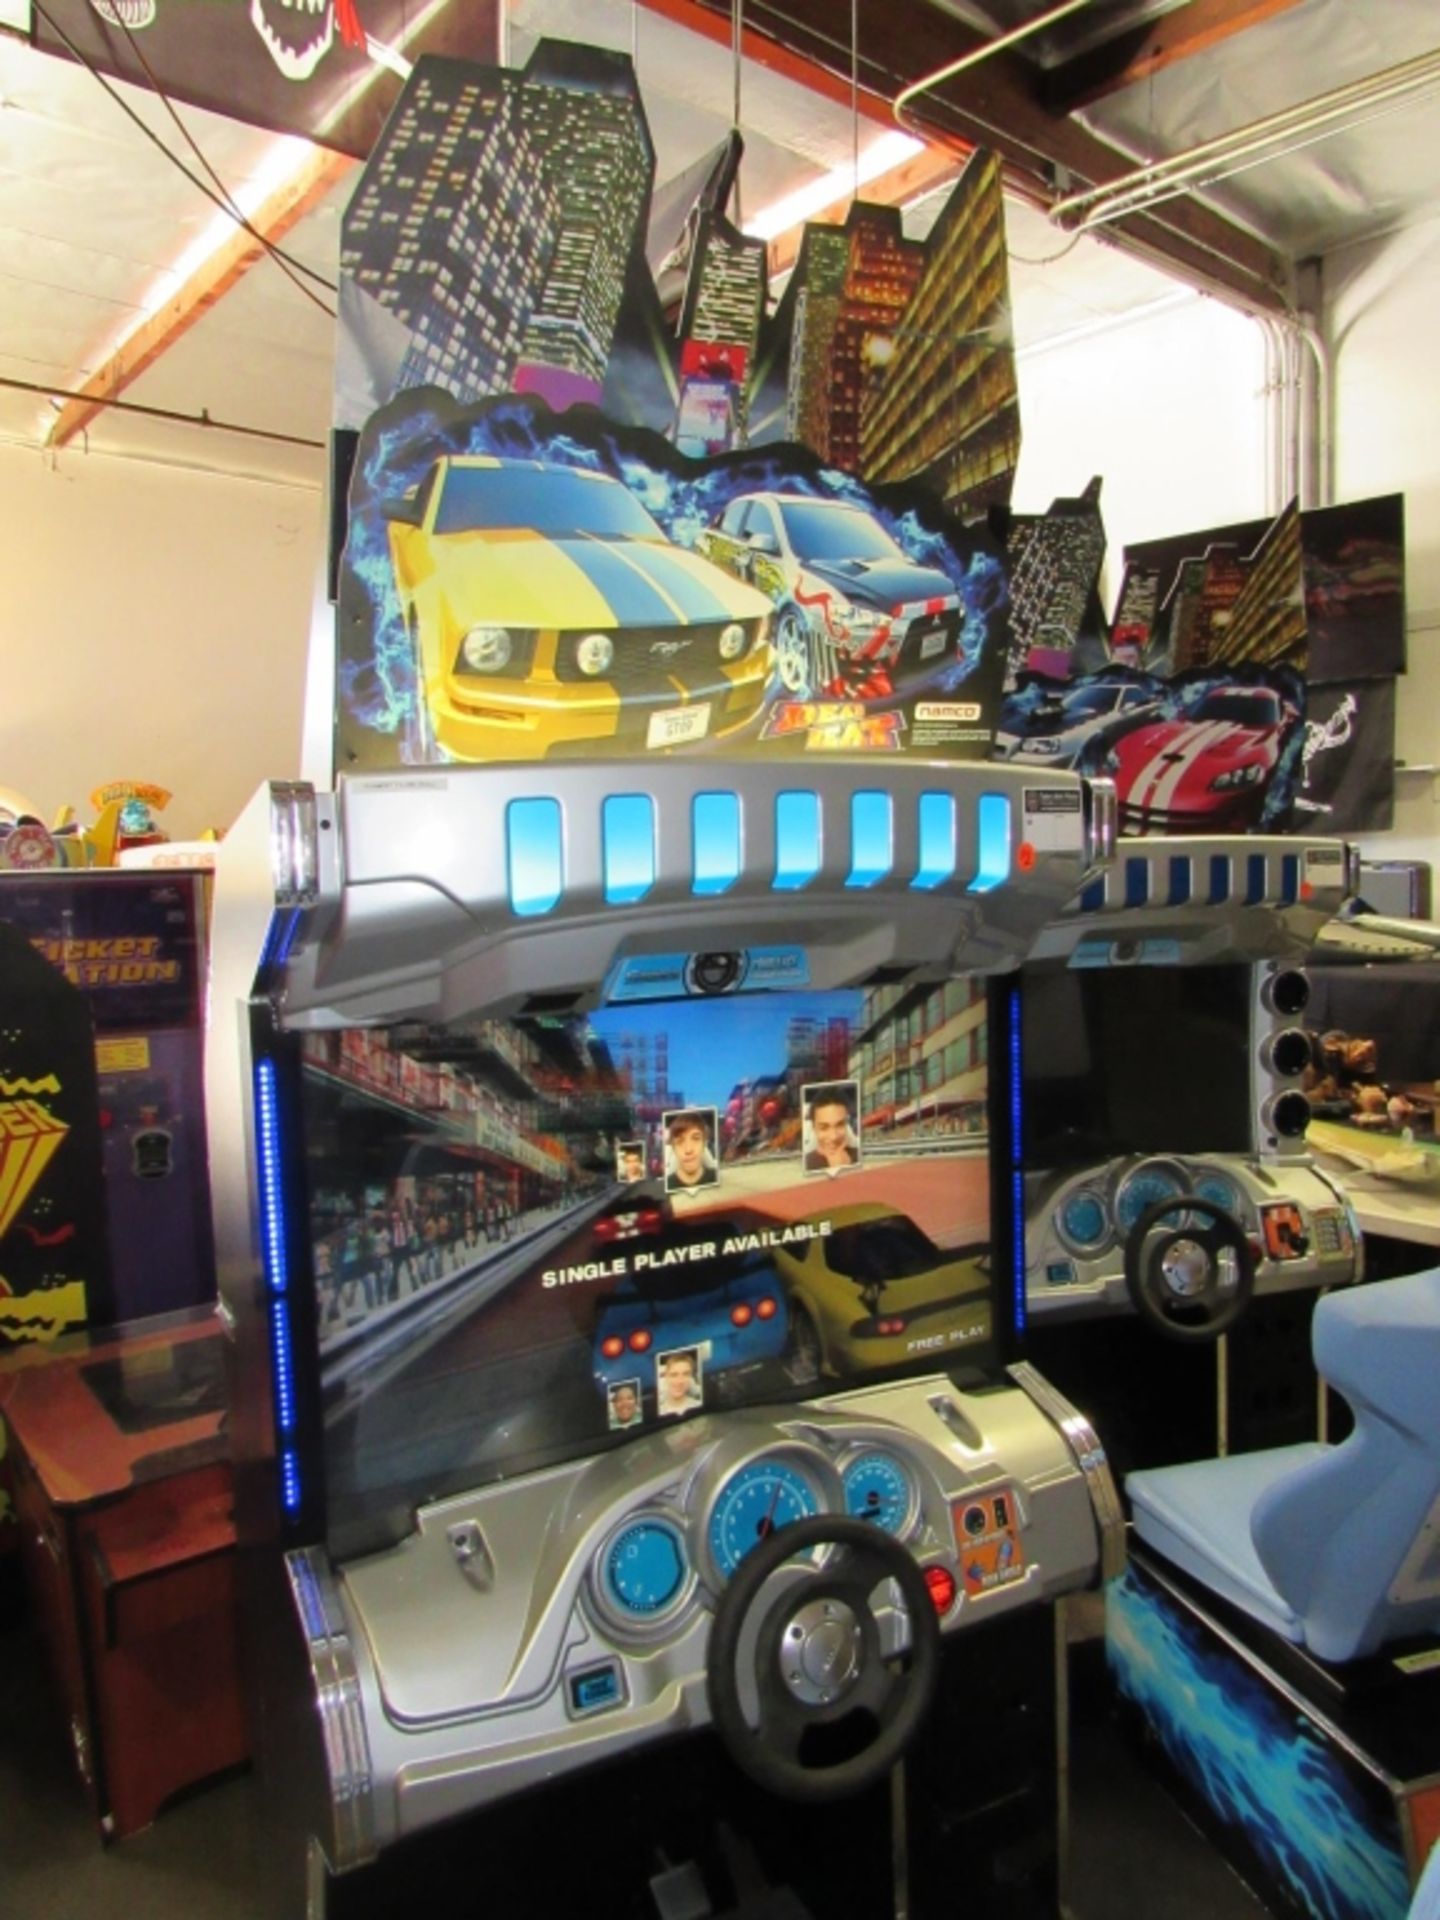 DEAD HEAT 42" DX DRIVER ARCADE GAME NAMCO - Image 2 of 6